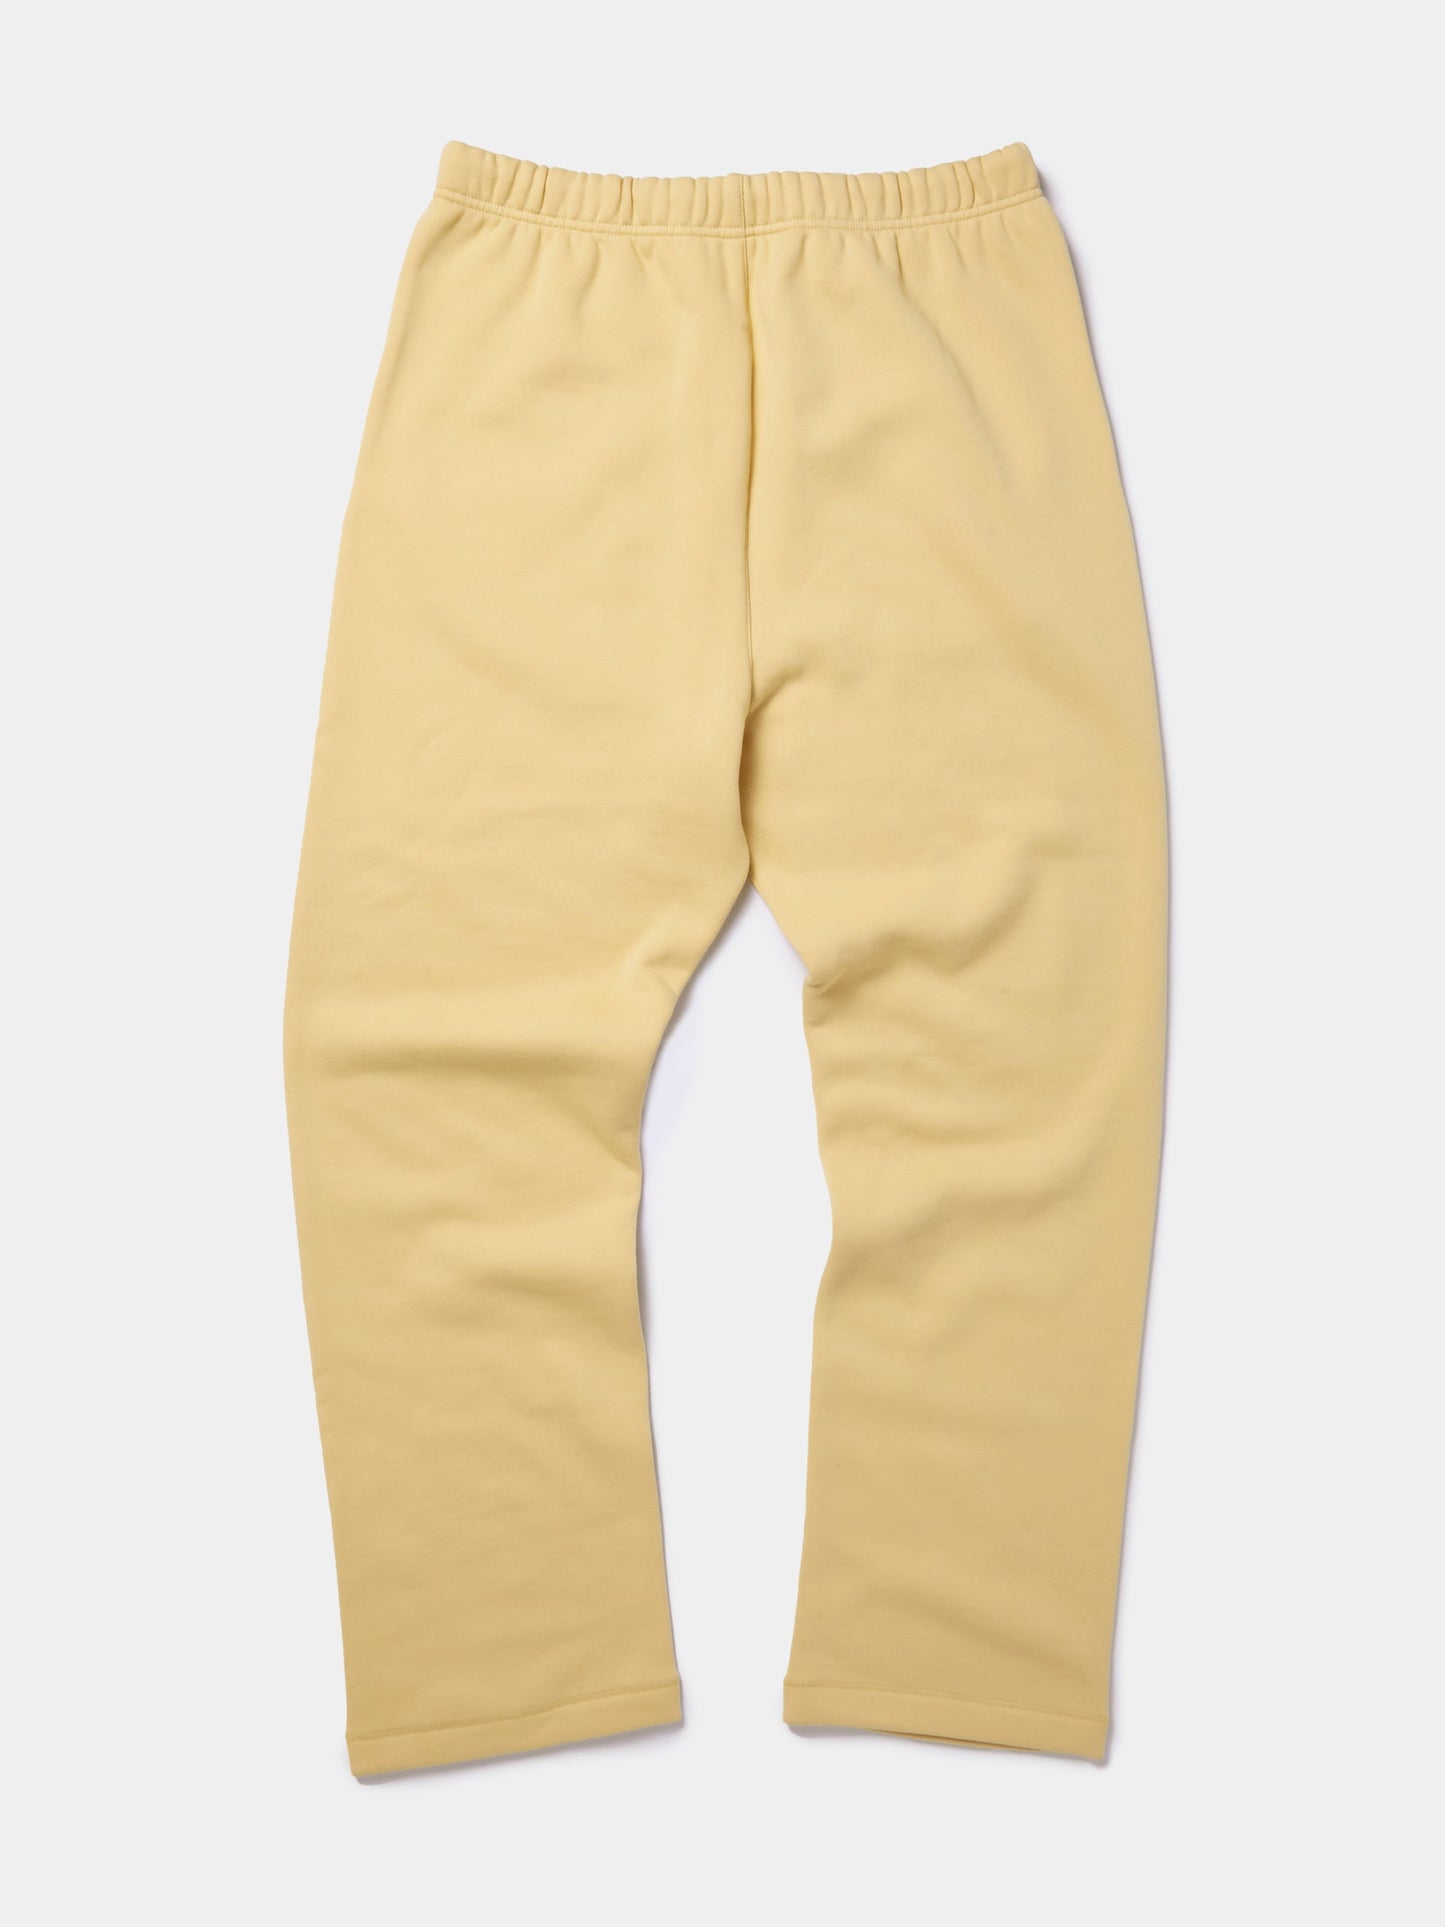 Relaxed Sweatpants (Light Tuscan)